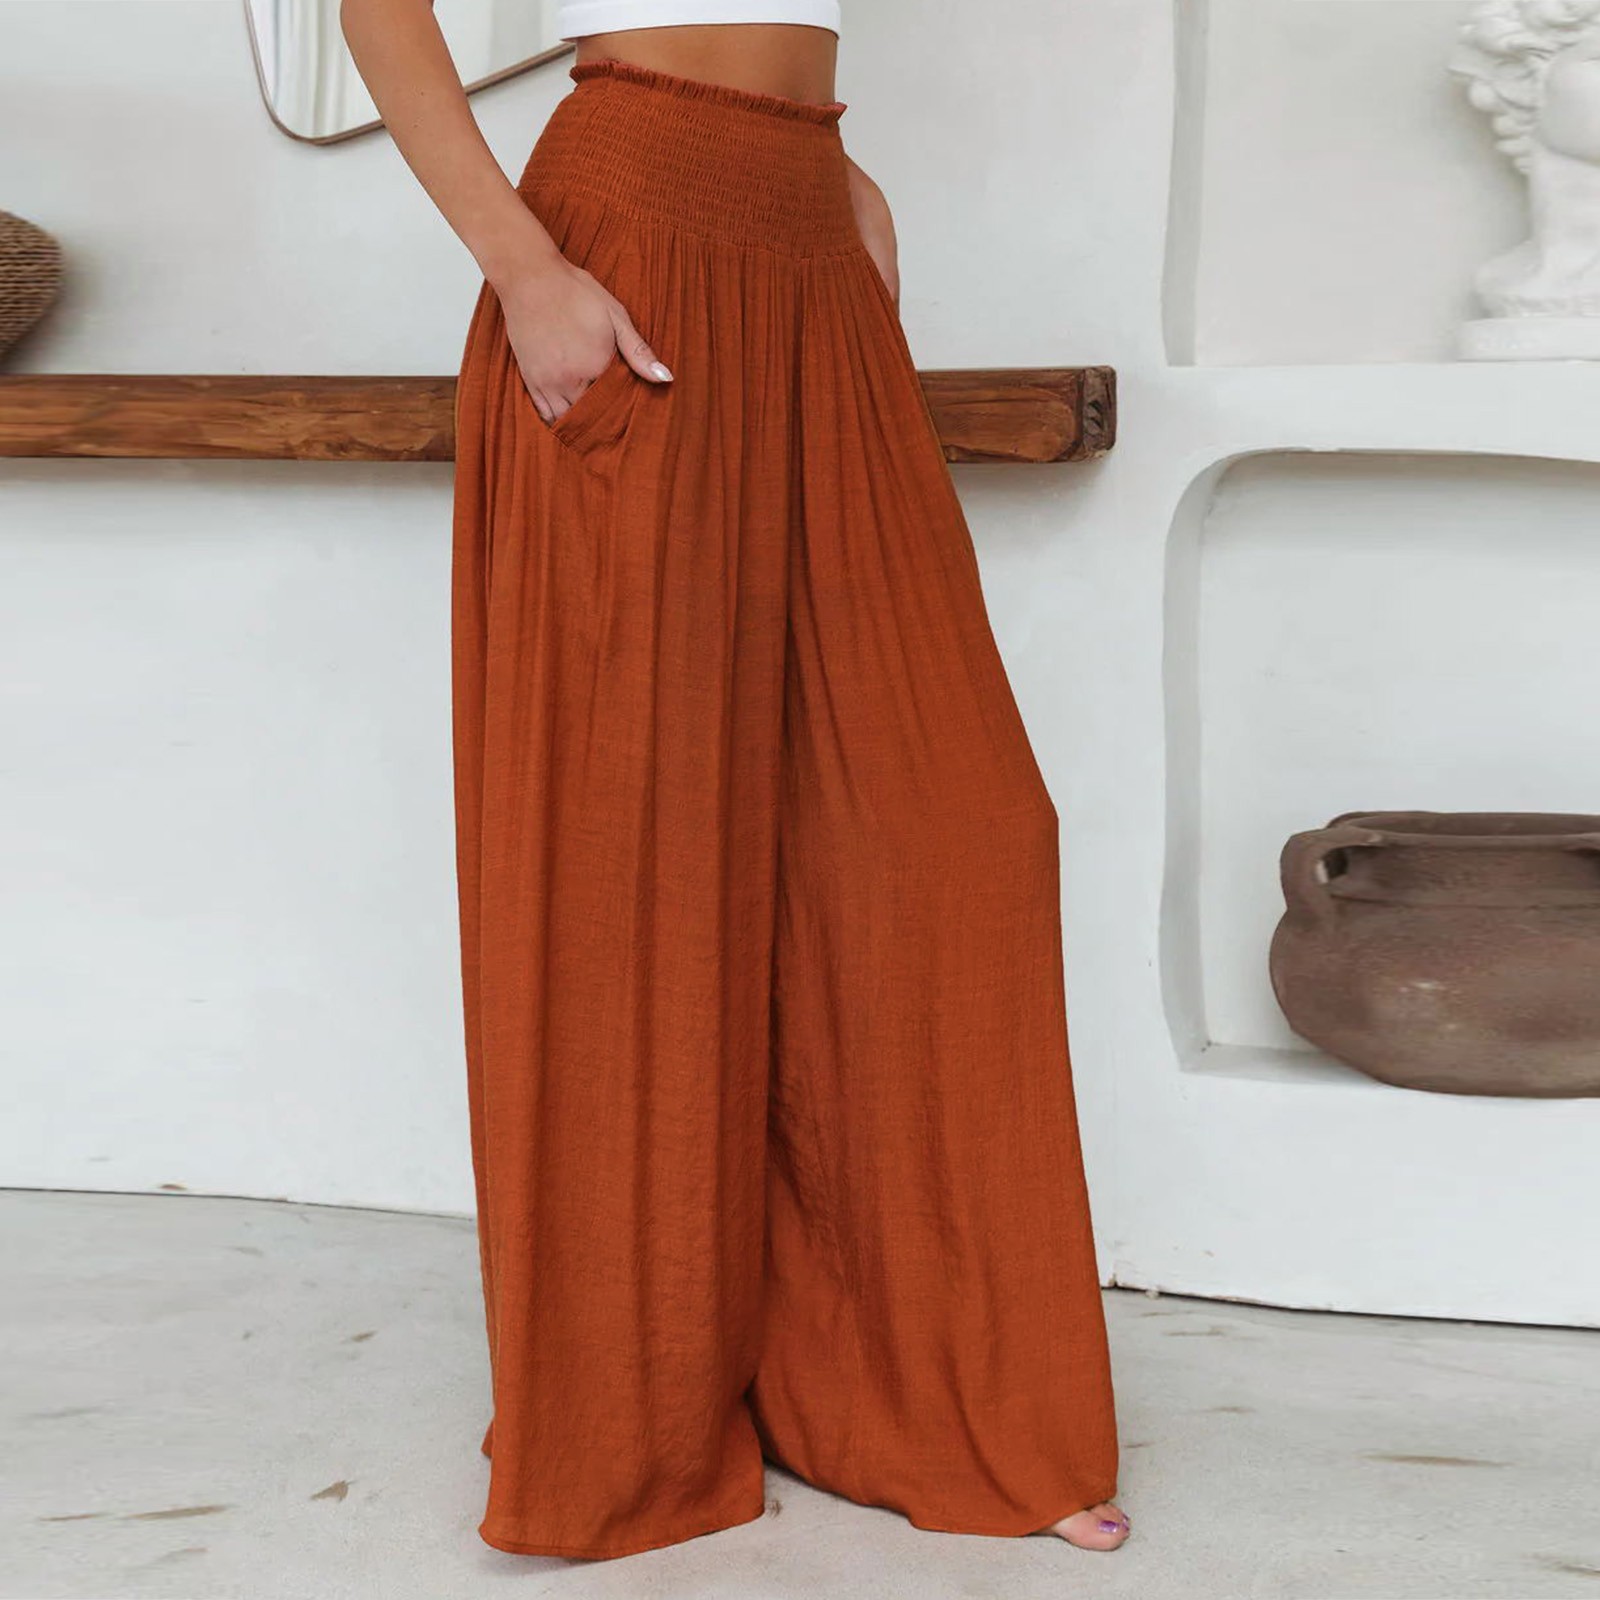 Wide red pants 1,2,3? | Red culottes outfit, Red trousers outfit, Red pants  outfit